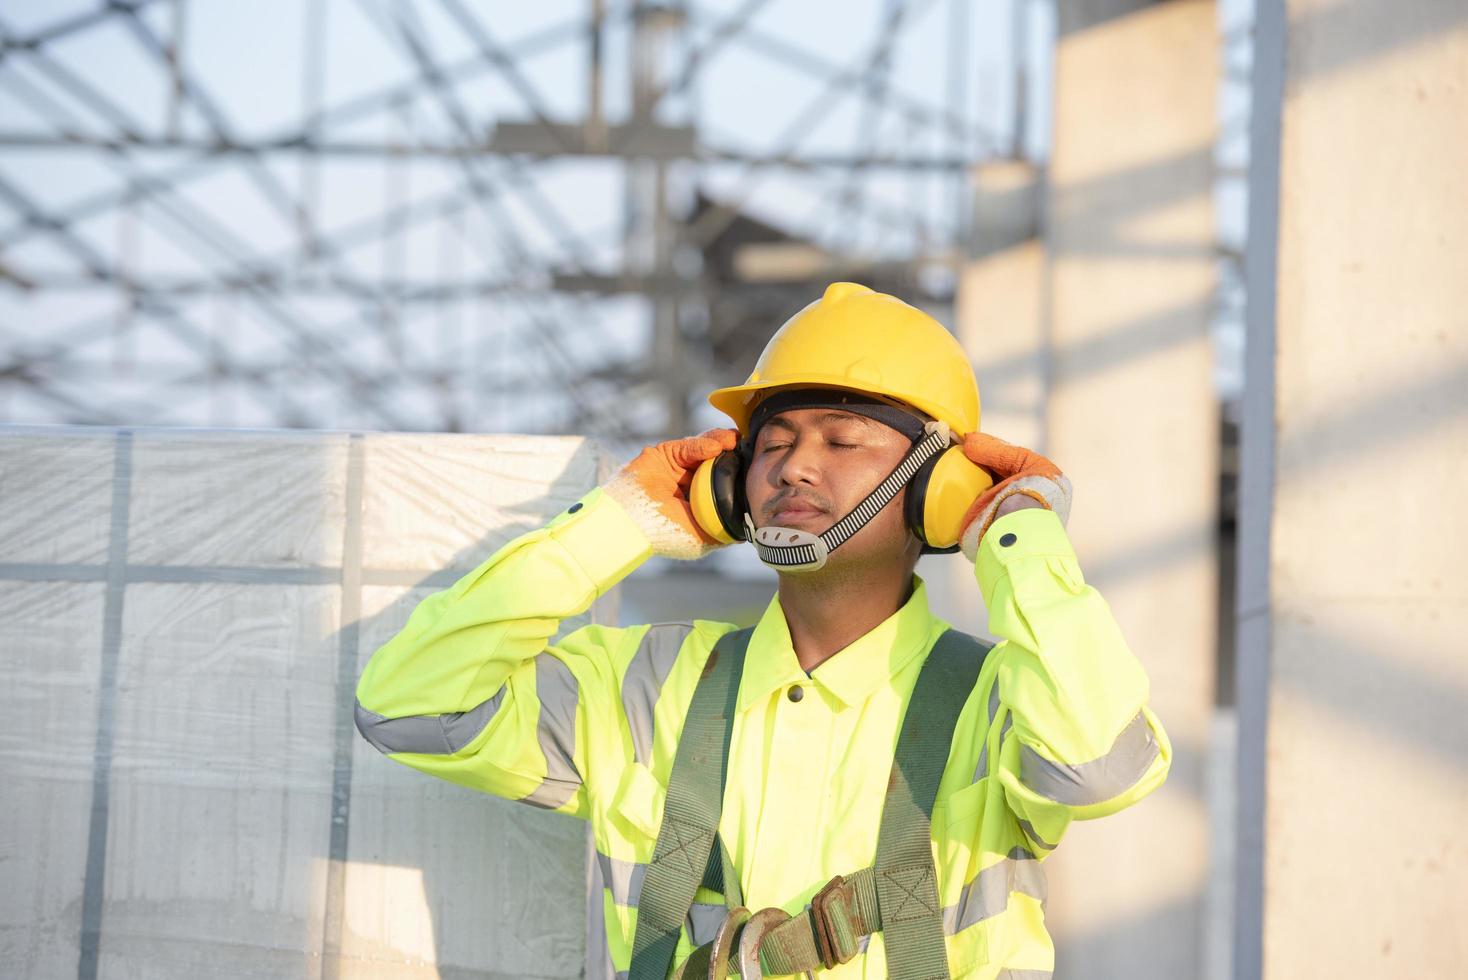 Asian engineers in safety helmets and worker safety vests with protective headphones at construction sites. photo